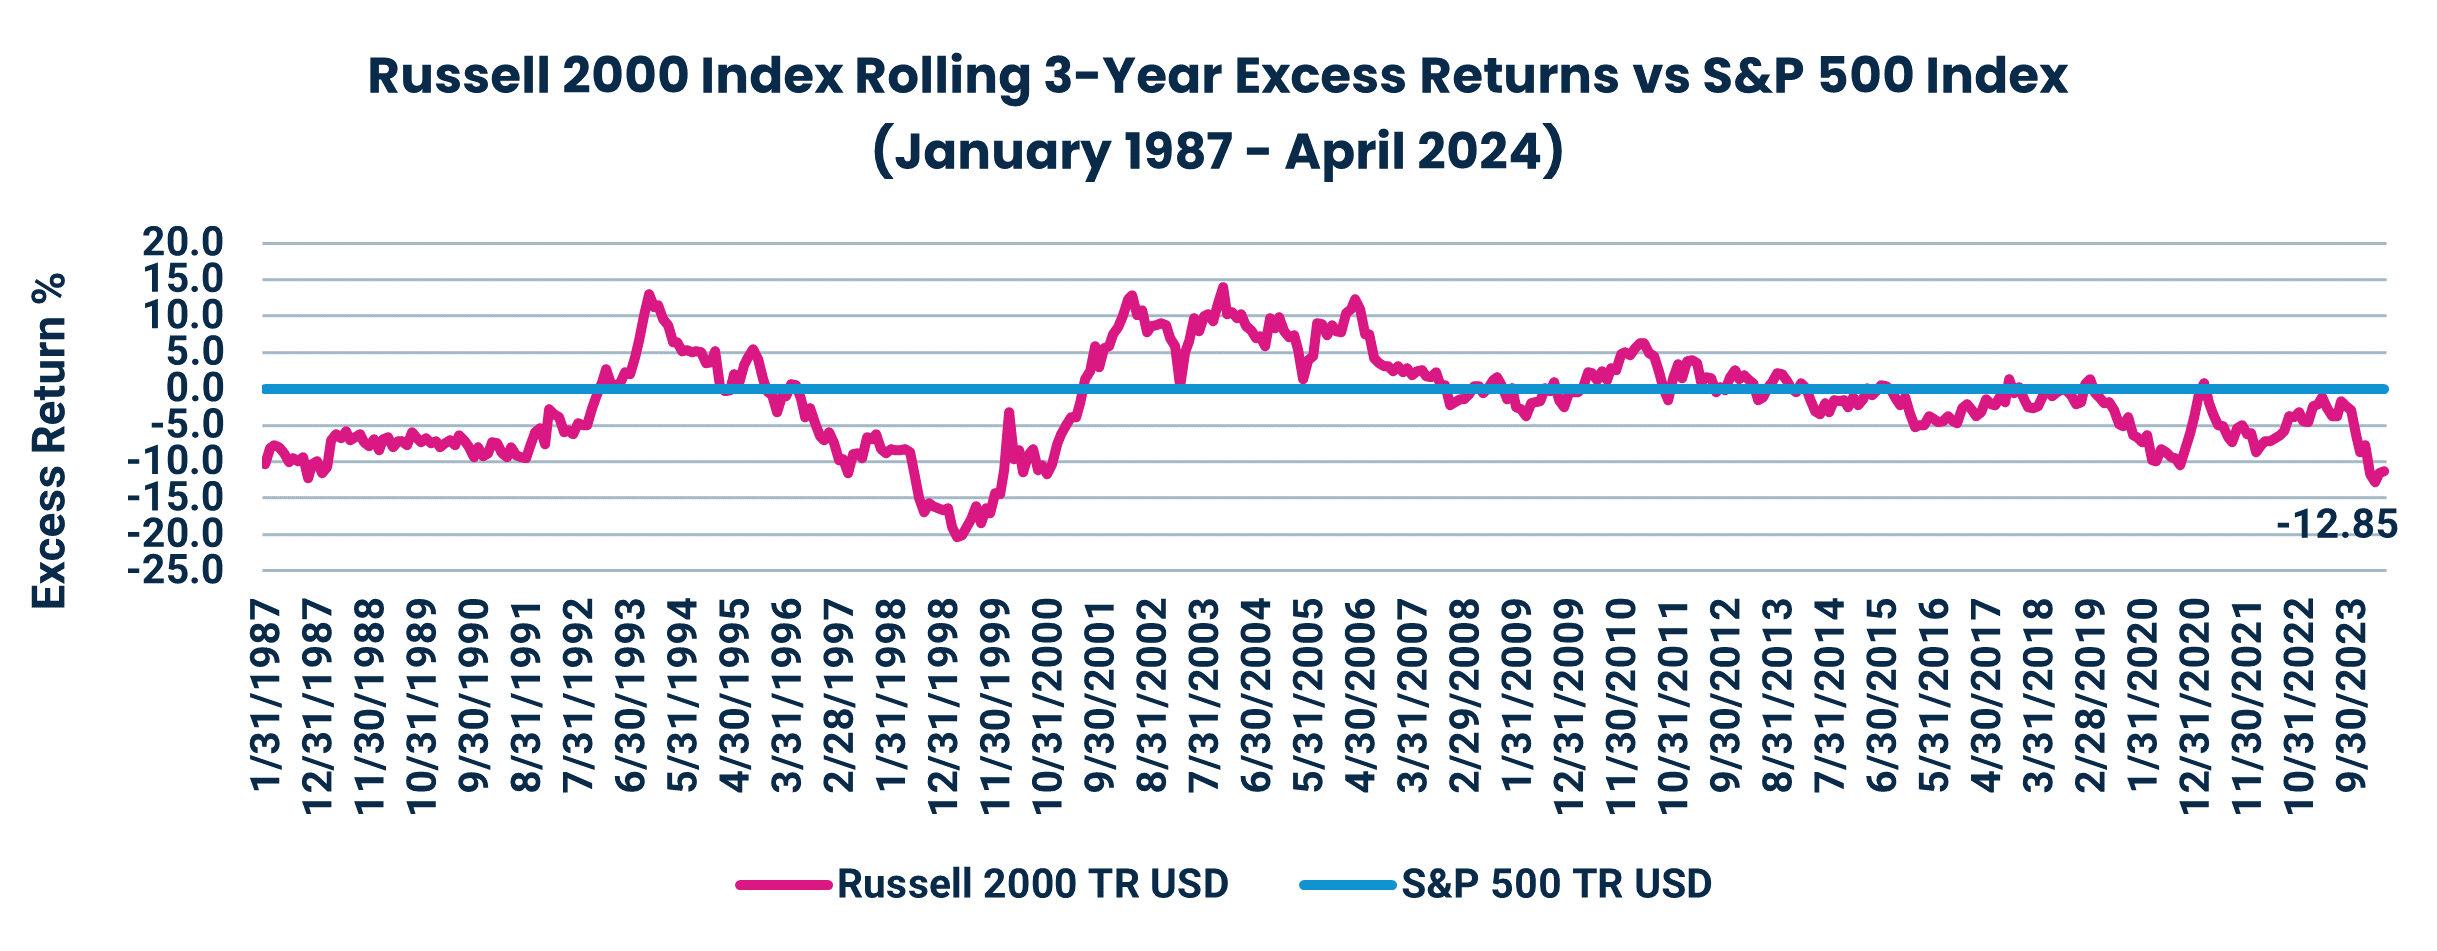 Russell 2000 Index Rolling 3-Year Excess Returns vs S&P 500 Index (January 1987 - April 2024)